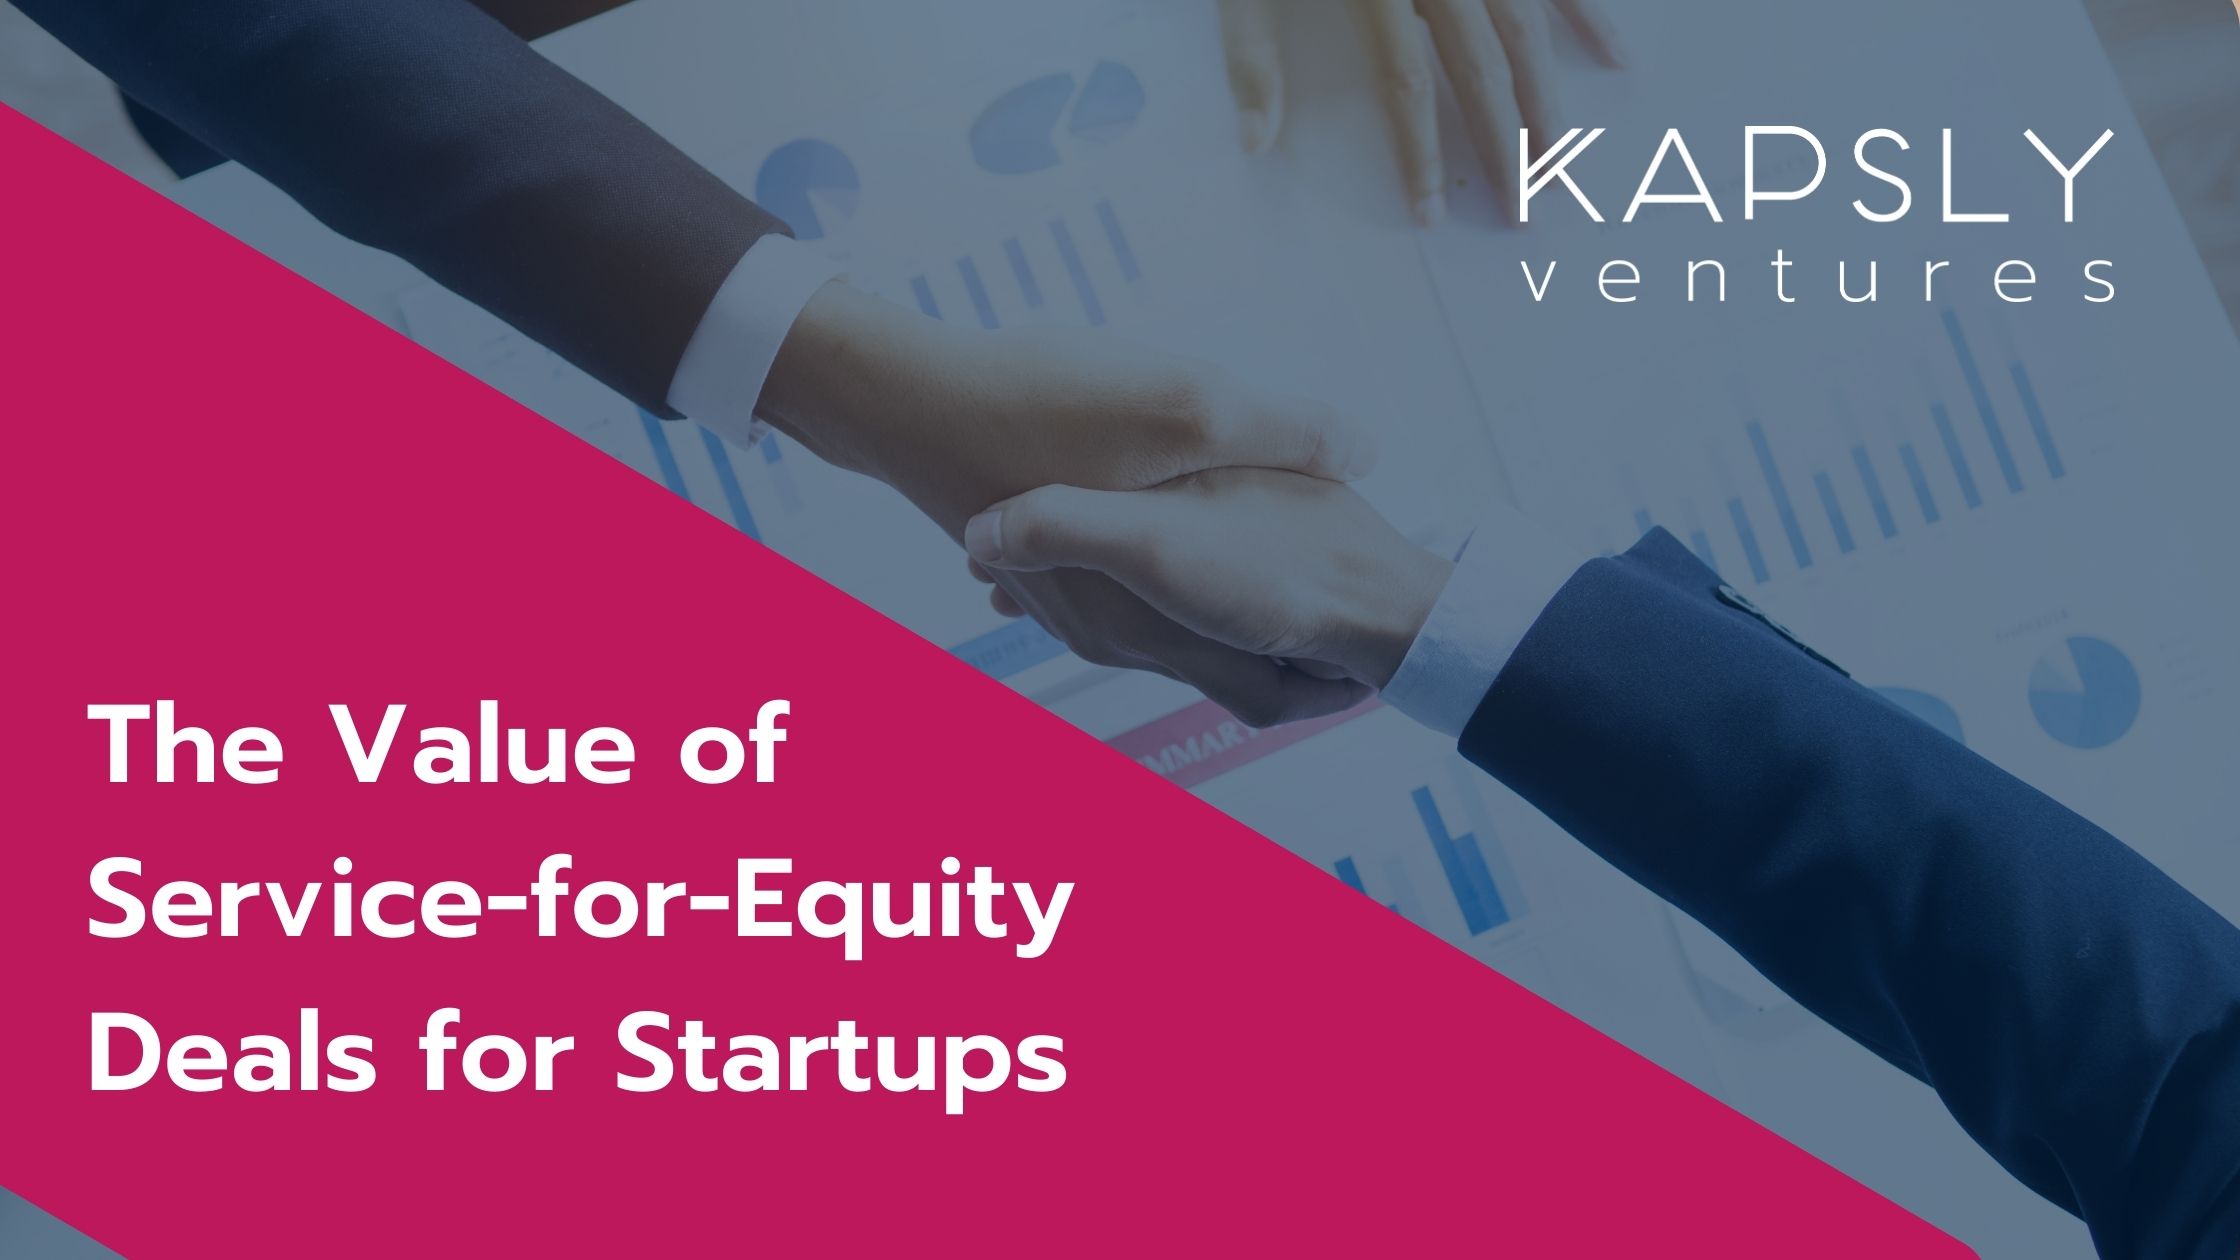 The Value of Service-for-Equity Deals for Startups